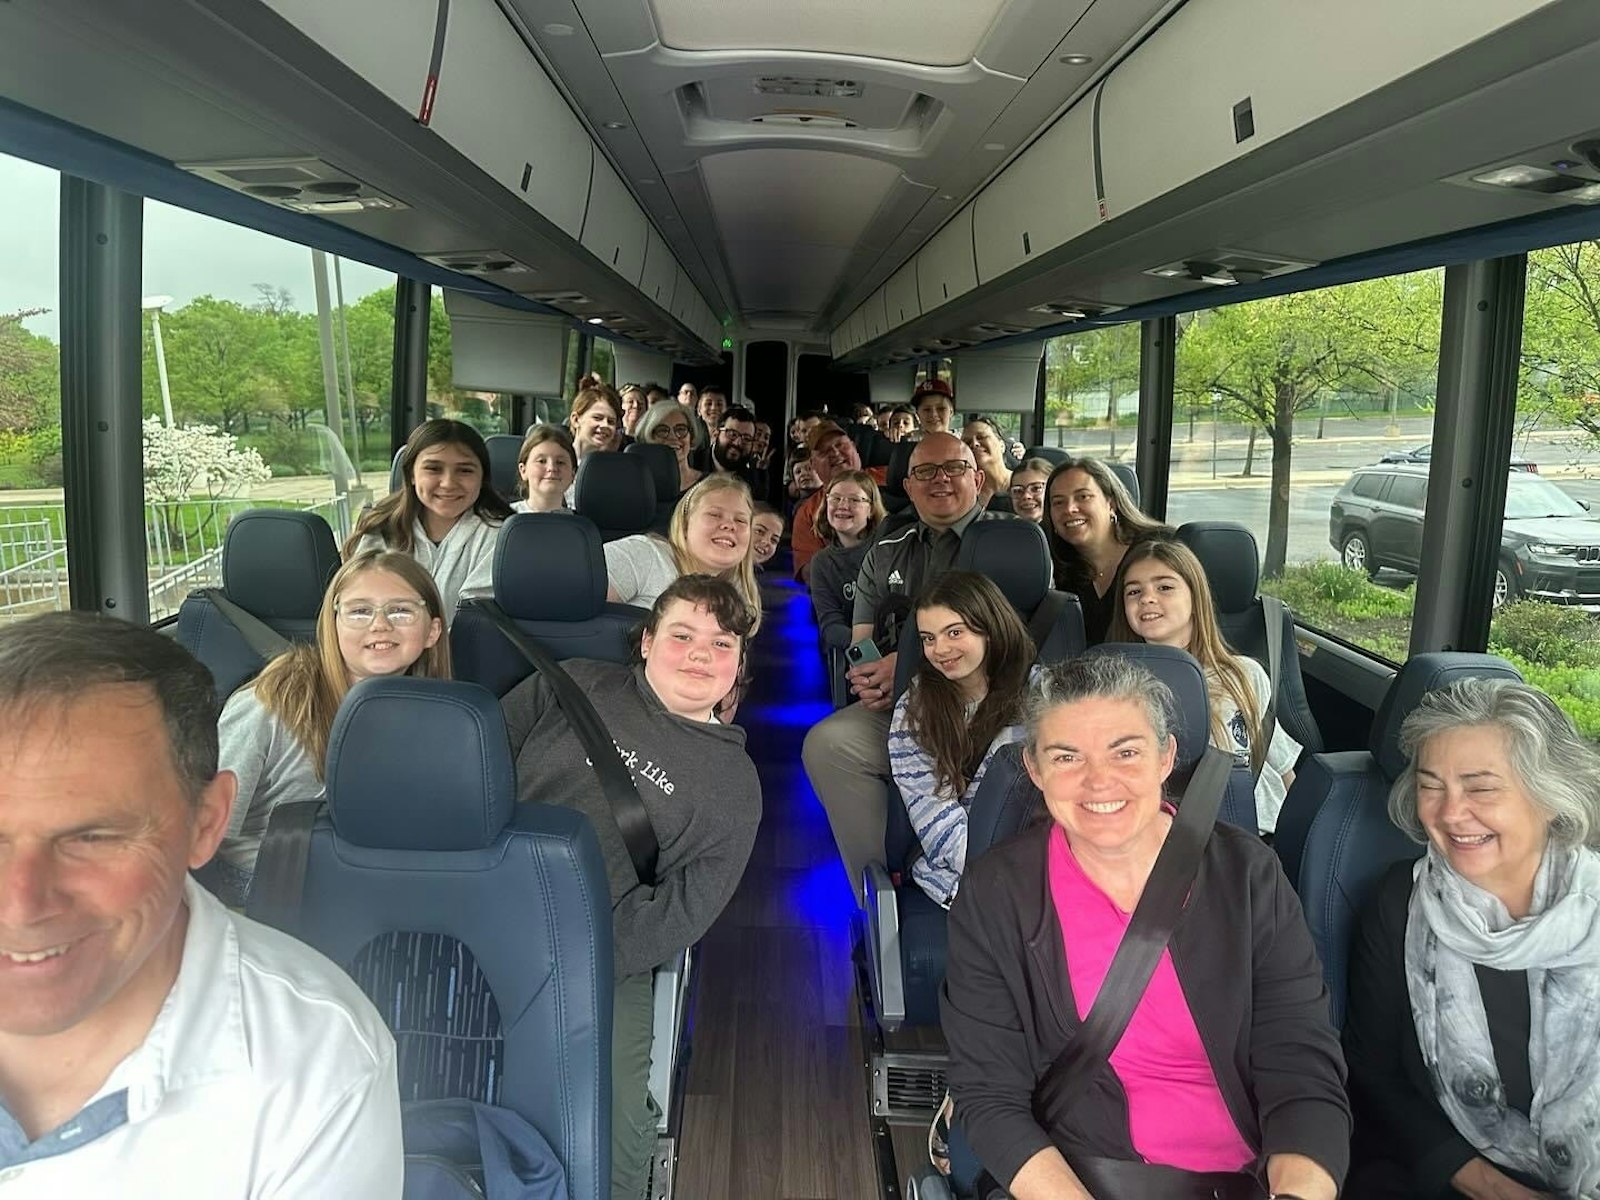 Choir members board the bus headed for Indiana. The choir's season will conclude Sunday, June 2, during the Solemnity of Corpus Christi at the Cathedral of the Most Blessed Sacrament in Detroit.